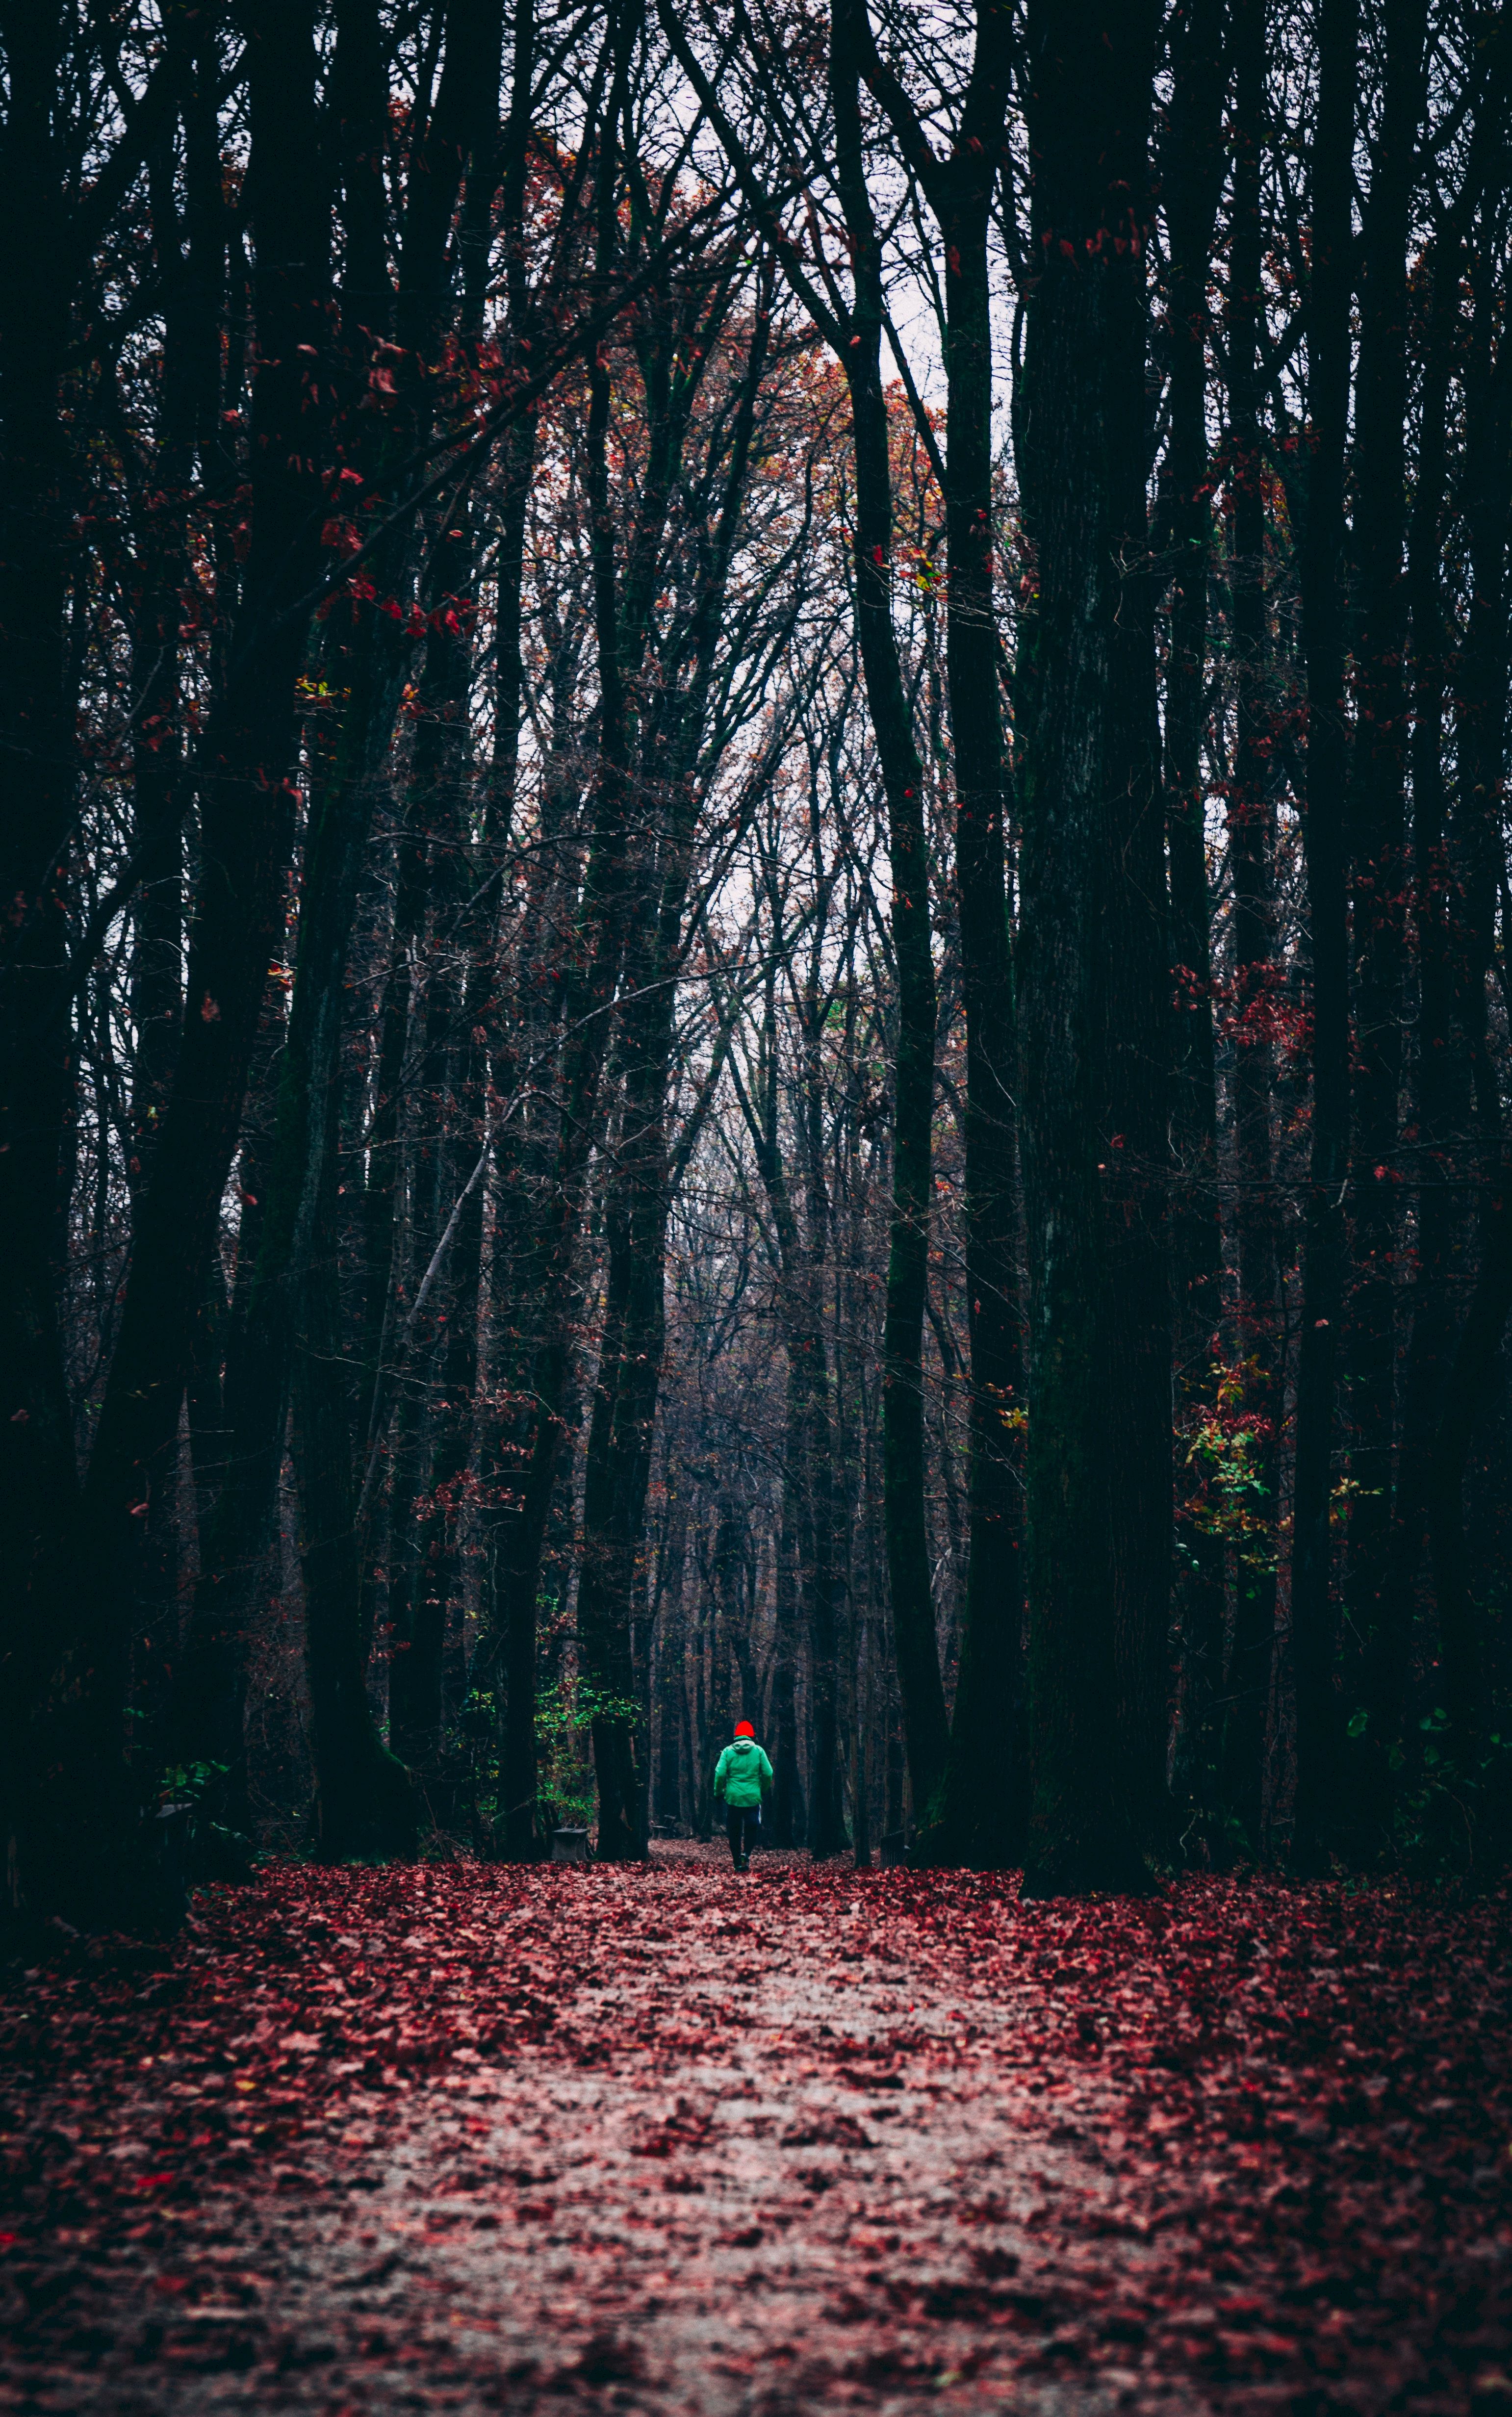 forest, nature, autumn, foliage, human, person, alone, lonely, run, running